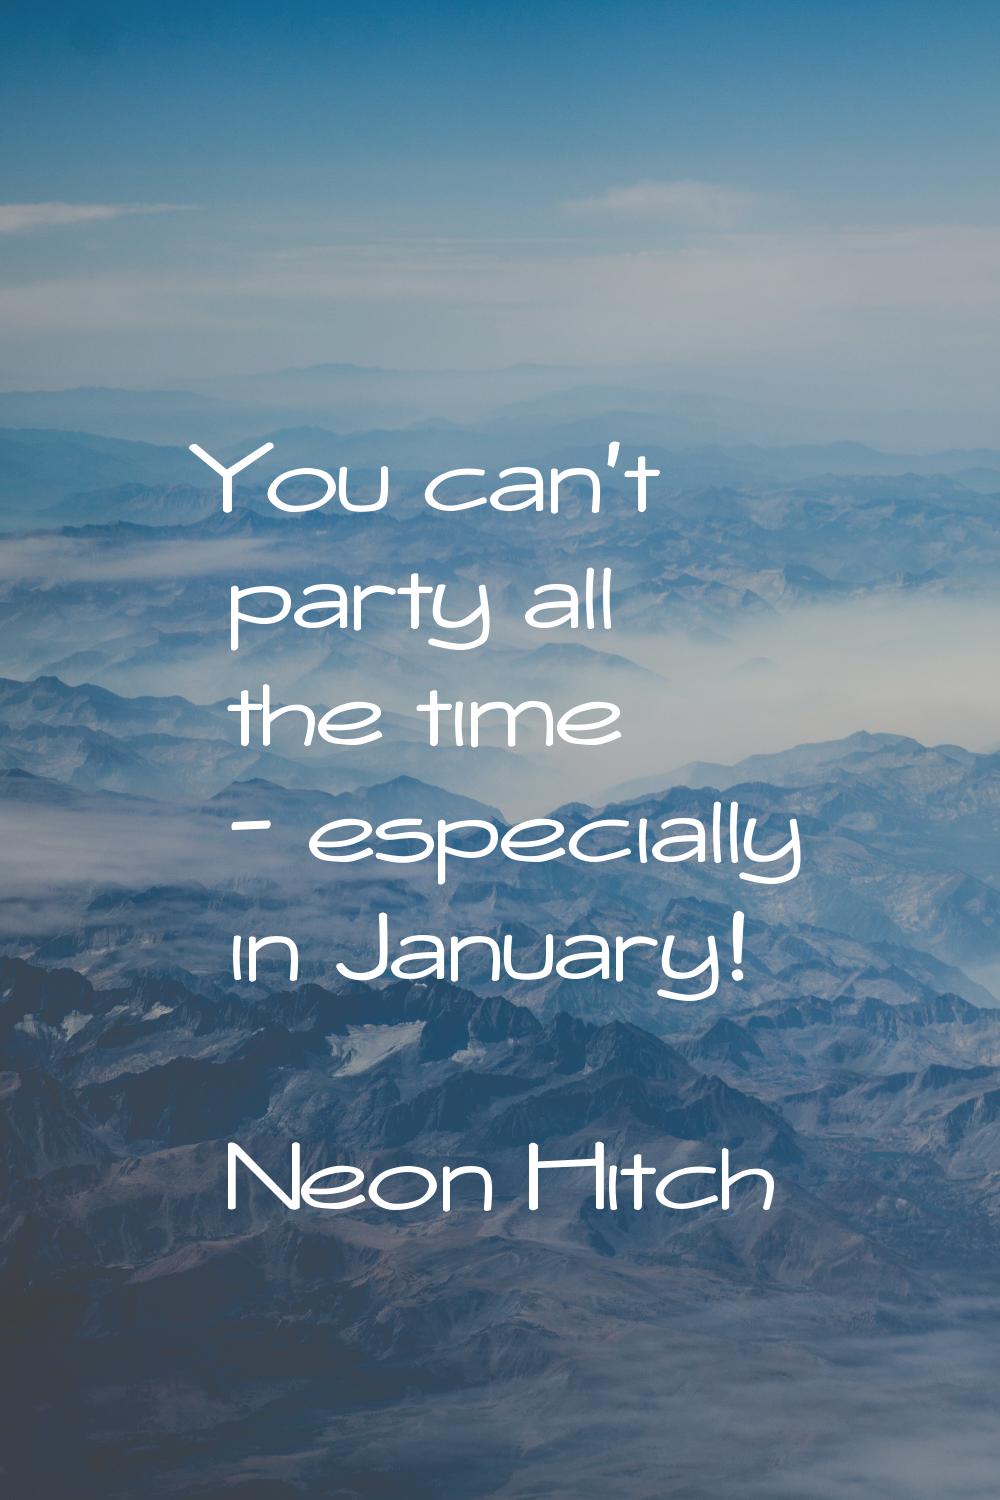 You can't party all the time - especially in January!